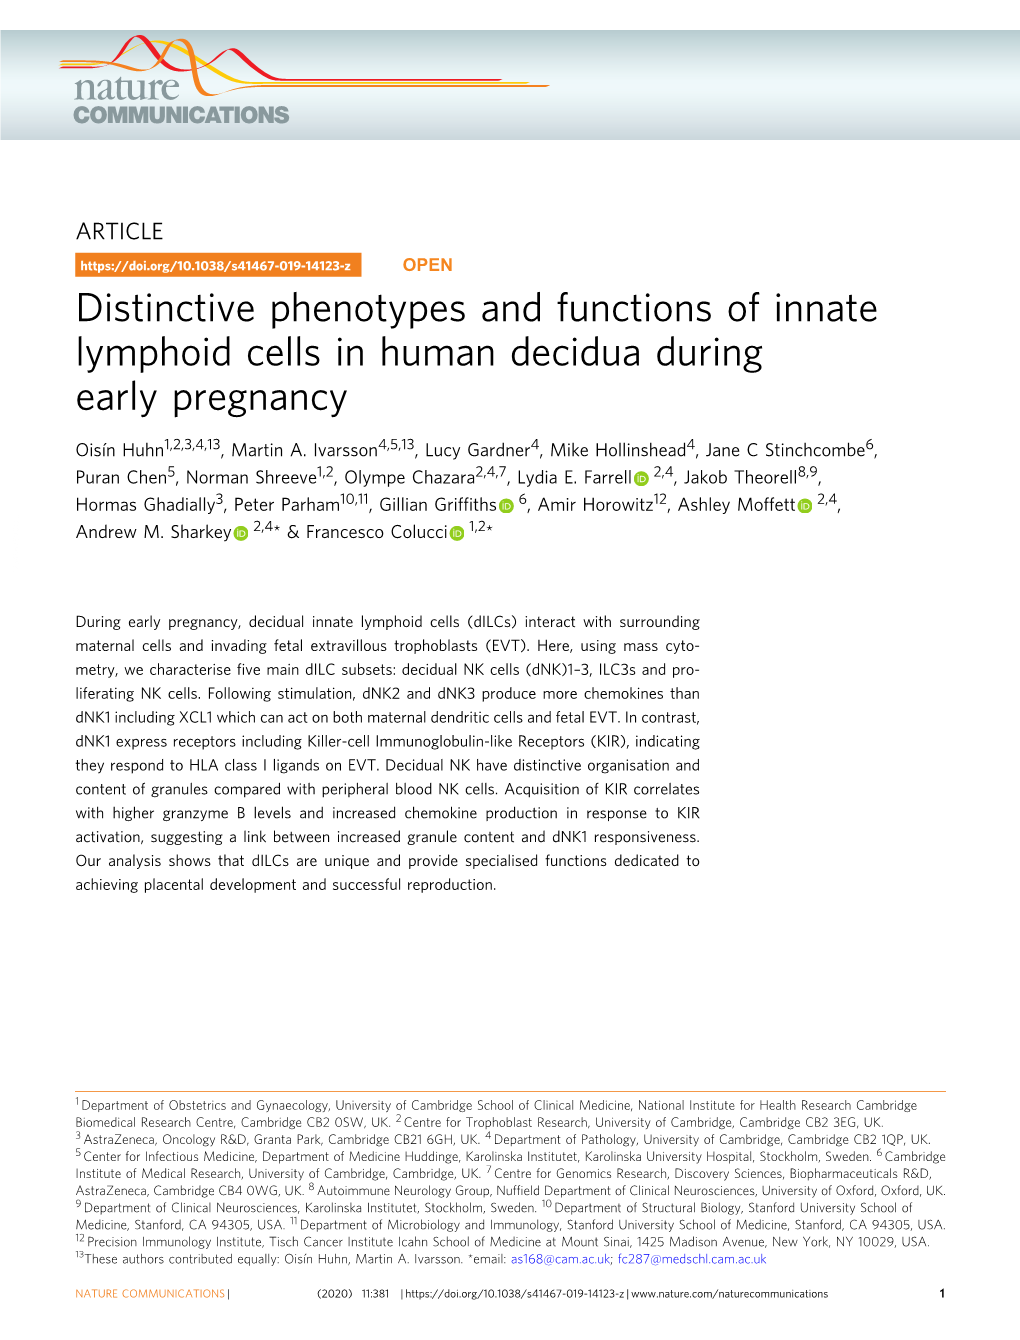 Distinctive Phenotypes and Functions of Innate Lymphoid Cells in Human Decidua During Early Pregnancy